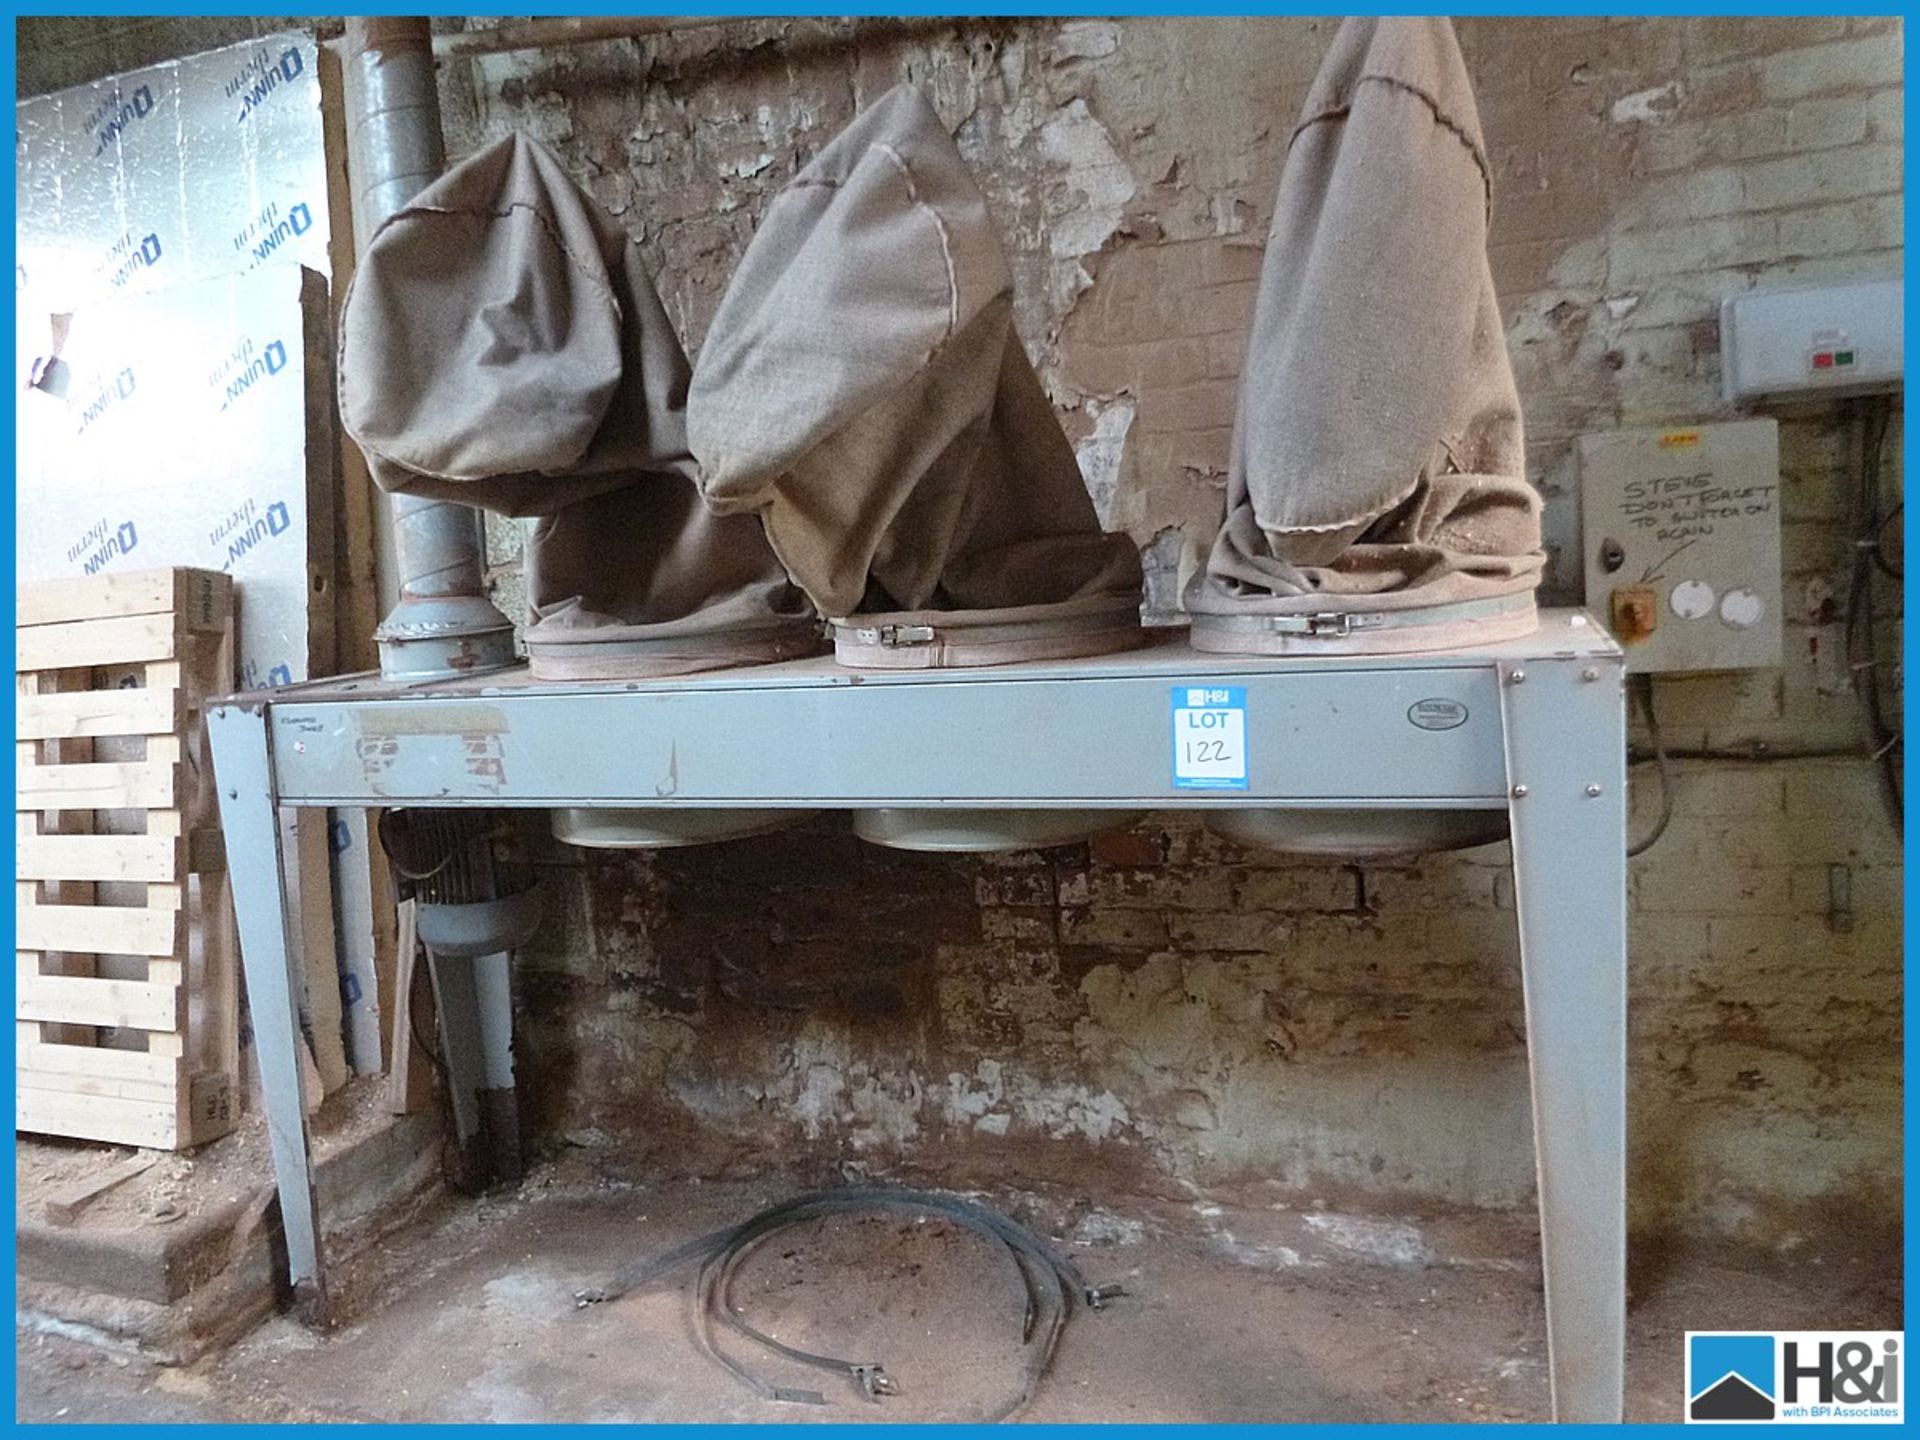 3 Bag 4kw Dust Extraction Unit ( No Ducting Included ) Appraisal: Viewing Essential Serial No: NA